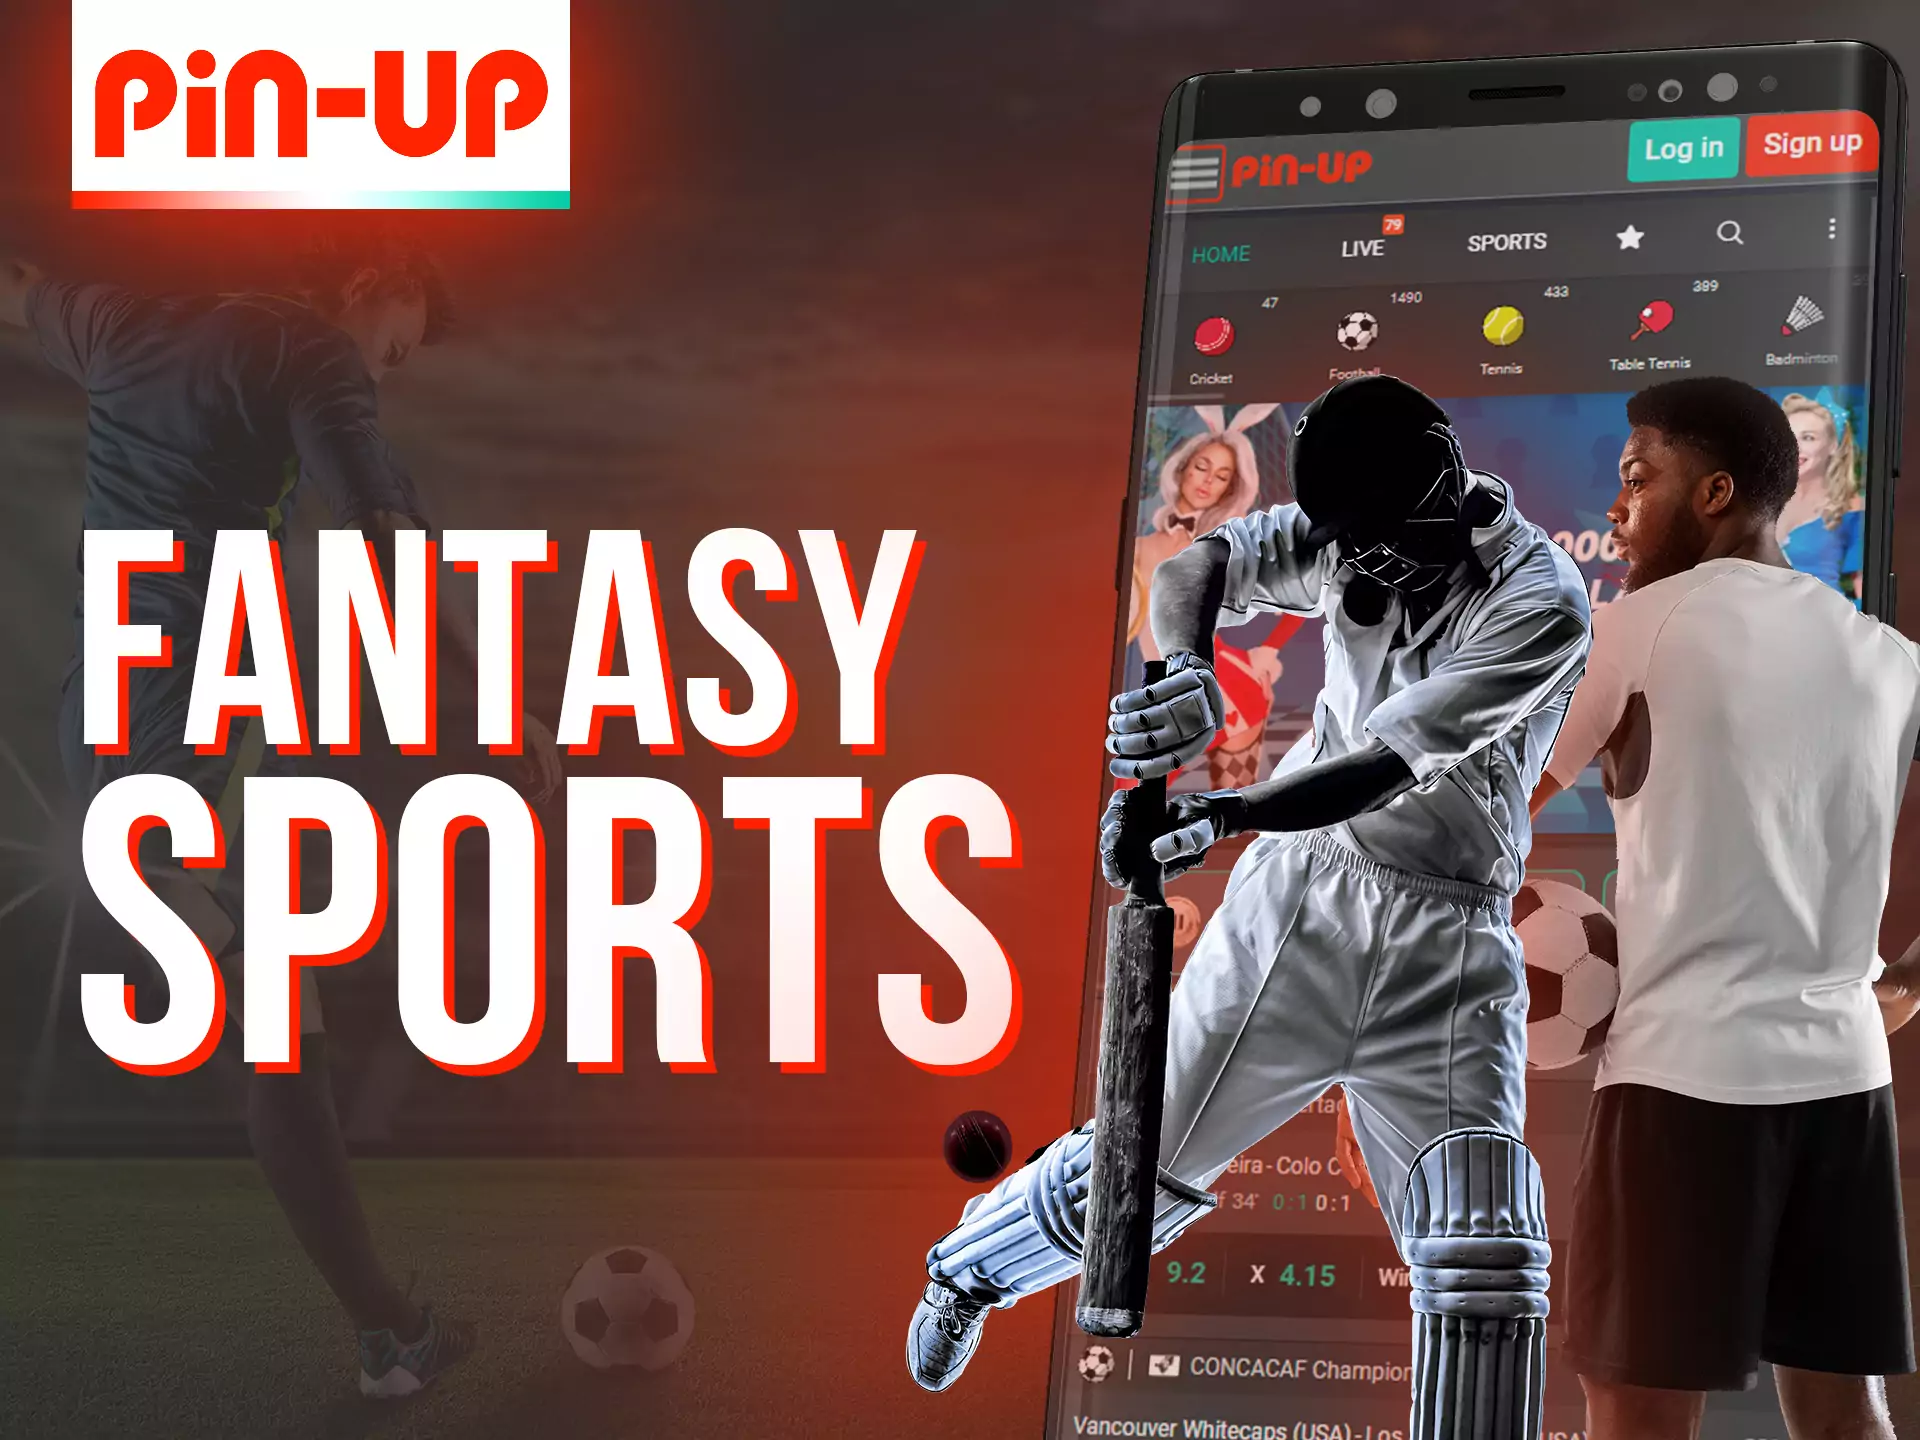 With the Pin-Up app, bet on fantasy sports.